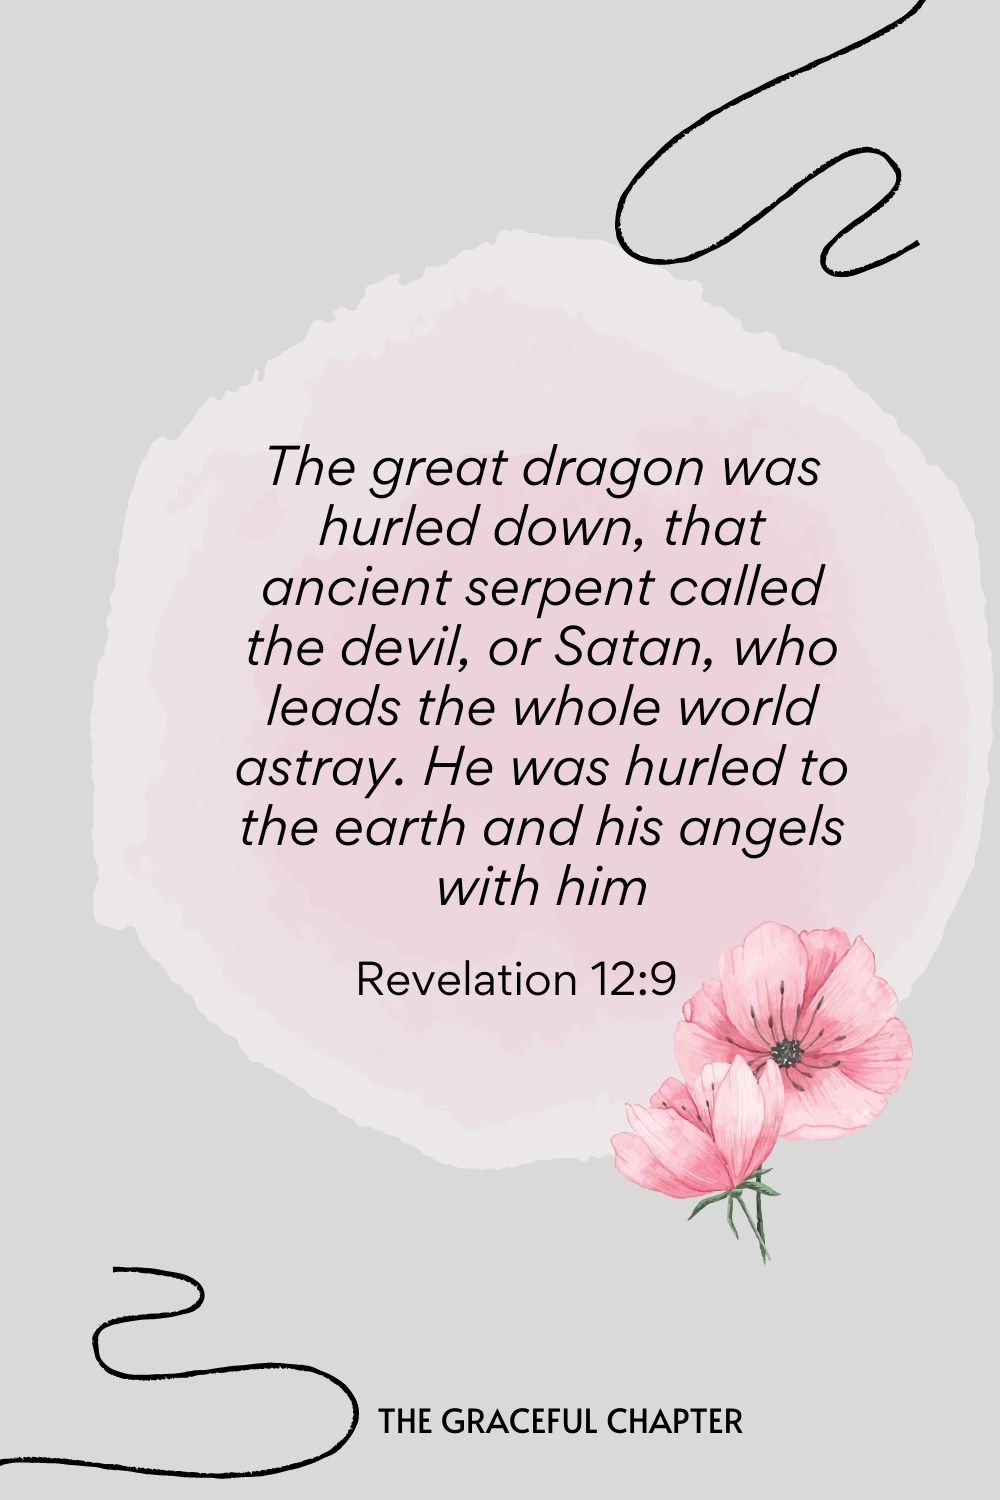 The great dragon was hurled down—that ancient serpent called the devil, or Satan, who leads the whole world astray. He was hurled to the earth, and his angels with him.  Revelation 12:9